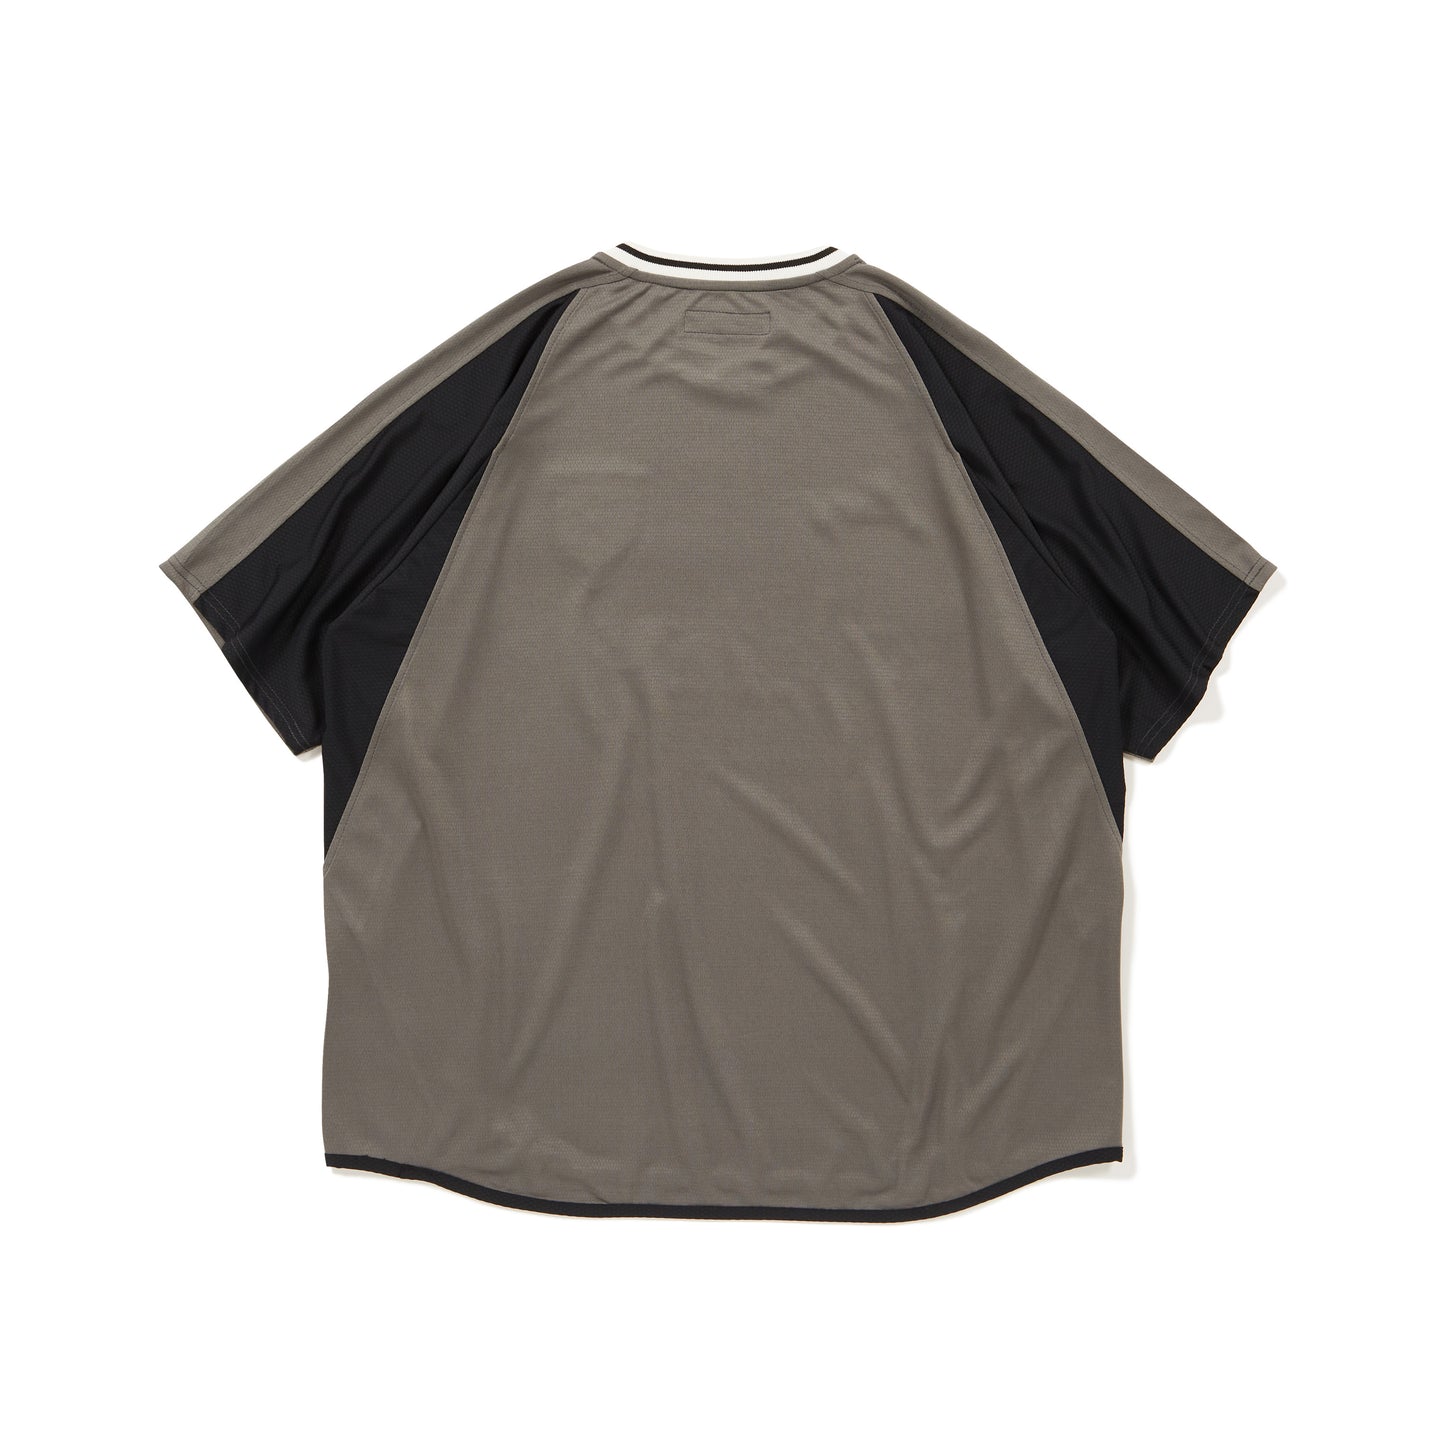 DEESP Athletic Jersey (Charcoal)